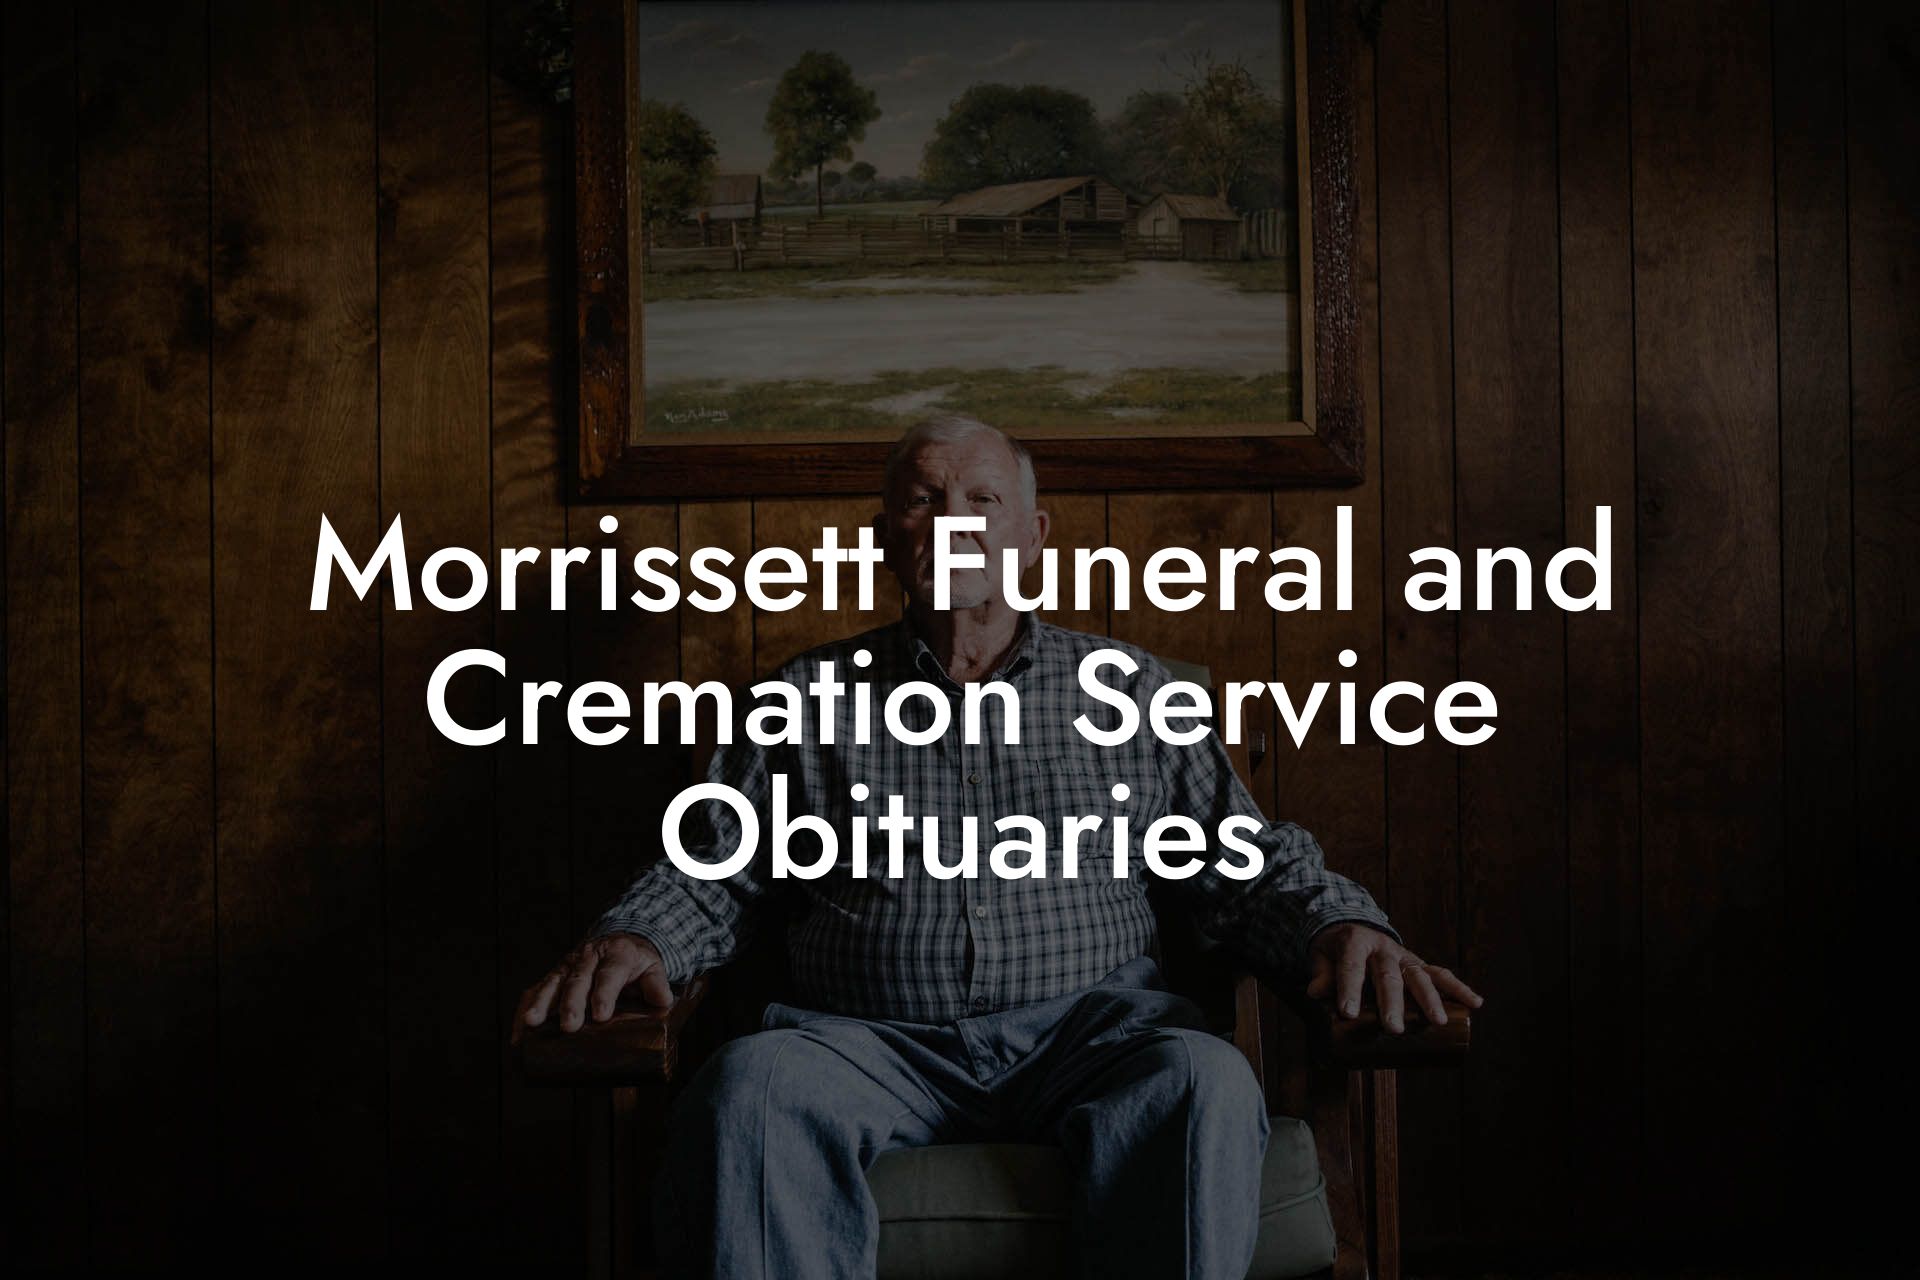 Morrissett Funeral and Cremation Service Obituaries - Eulogy Assistant